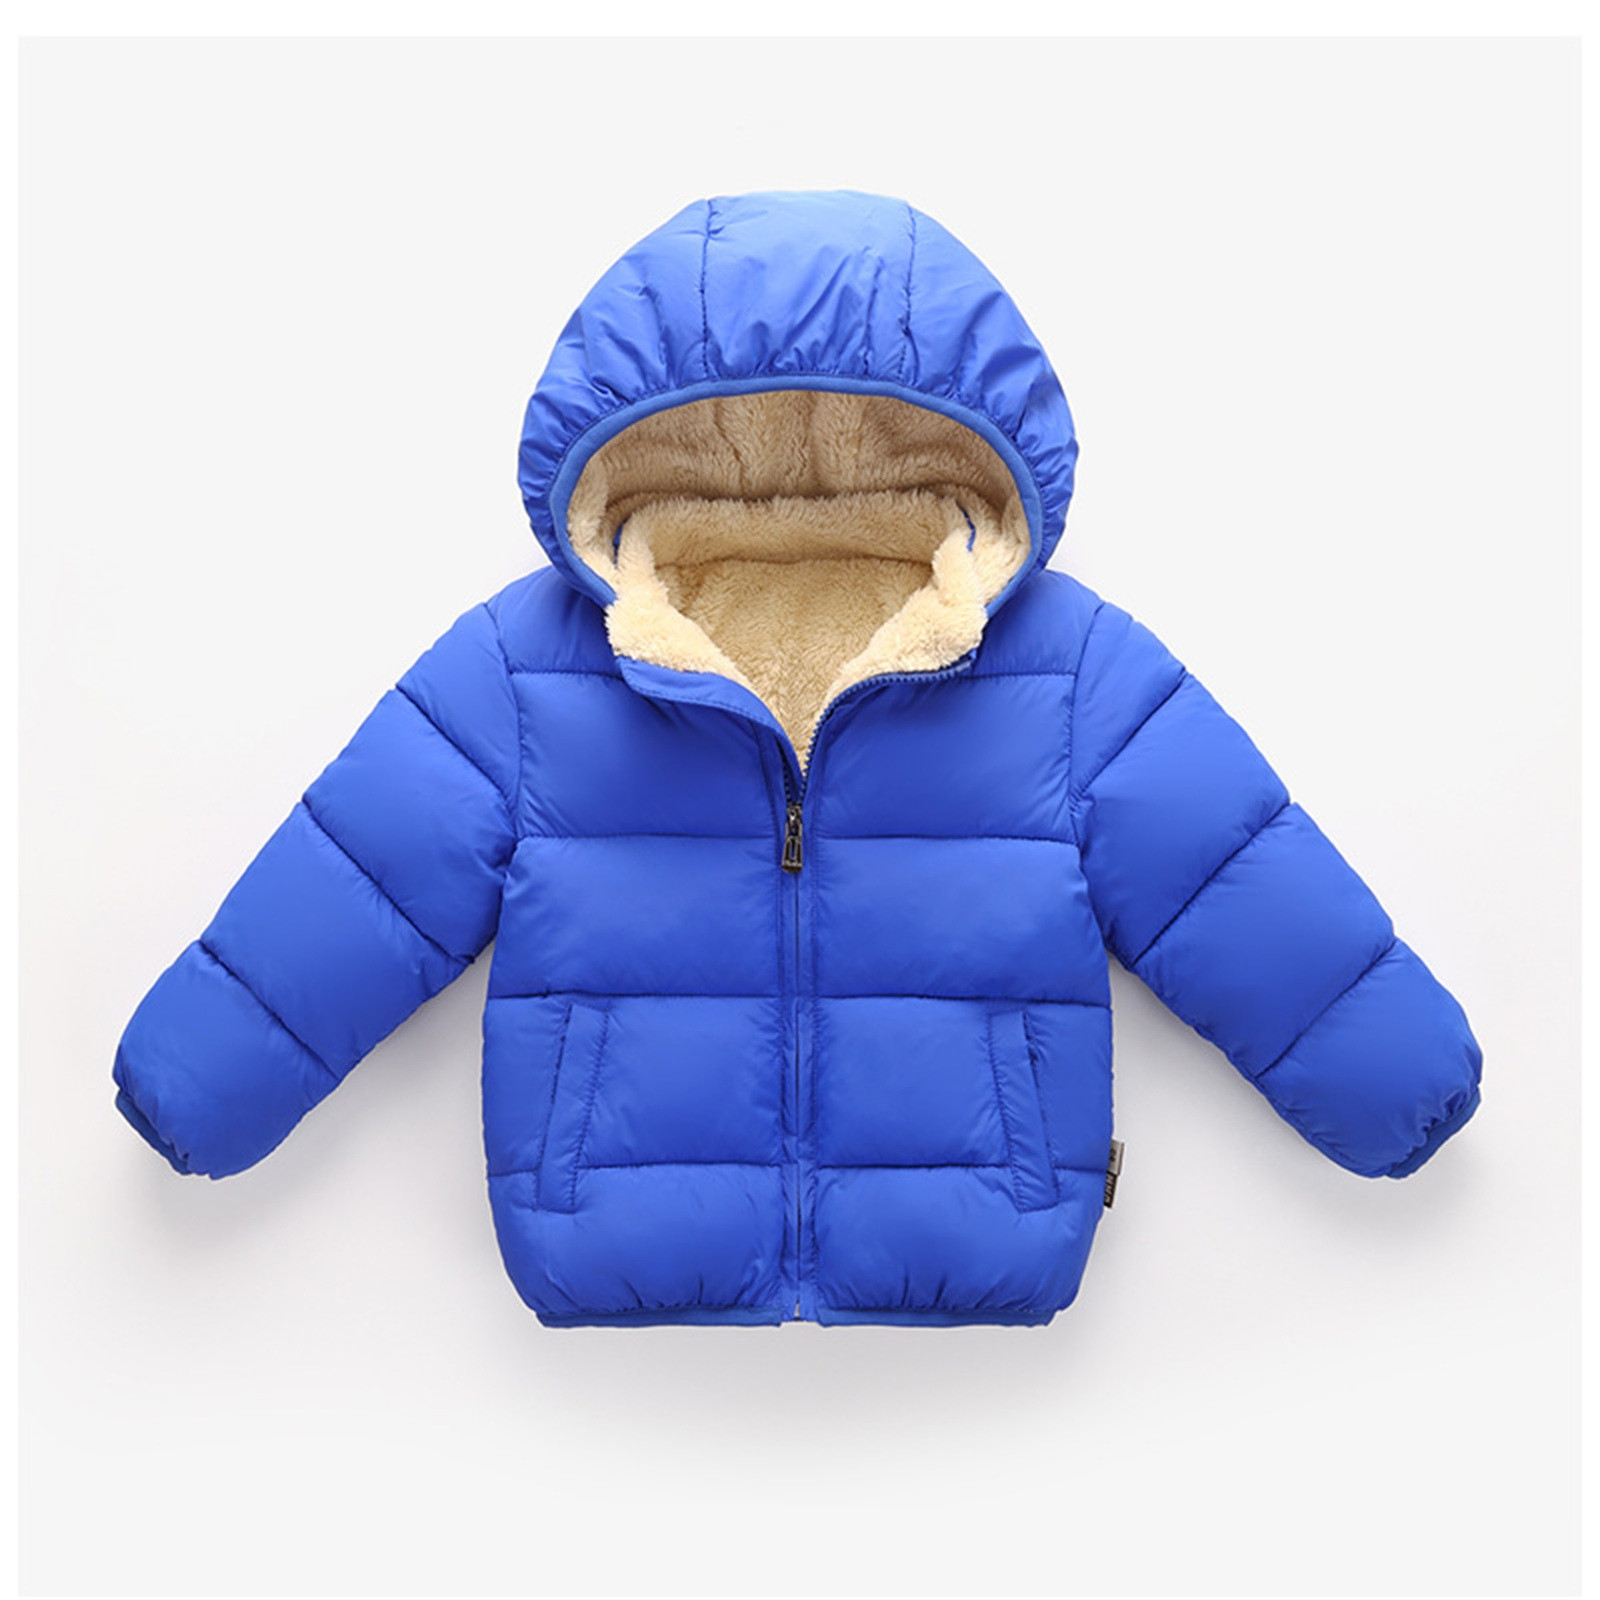 Kids Child Toddler Baby Boys Girls Solid Winter Hooded Coat Jacket Thick Warm Outerwear Clothes Outfits - image 2 of 5